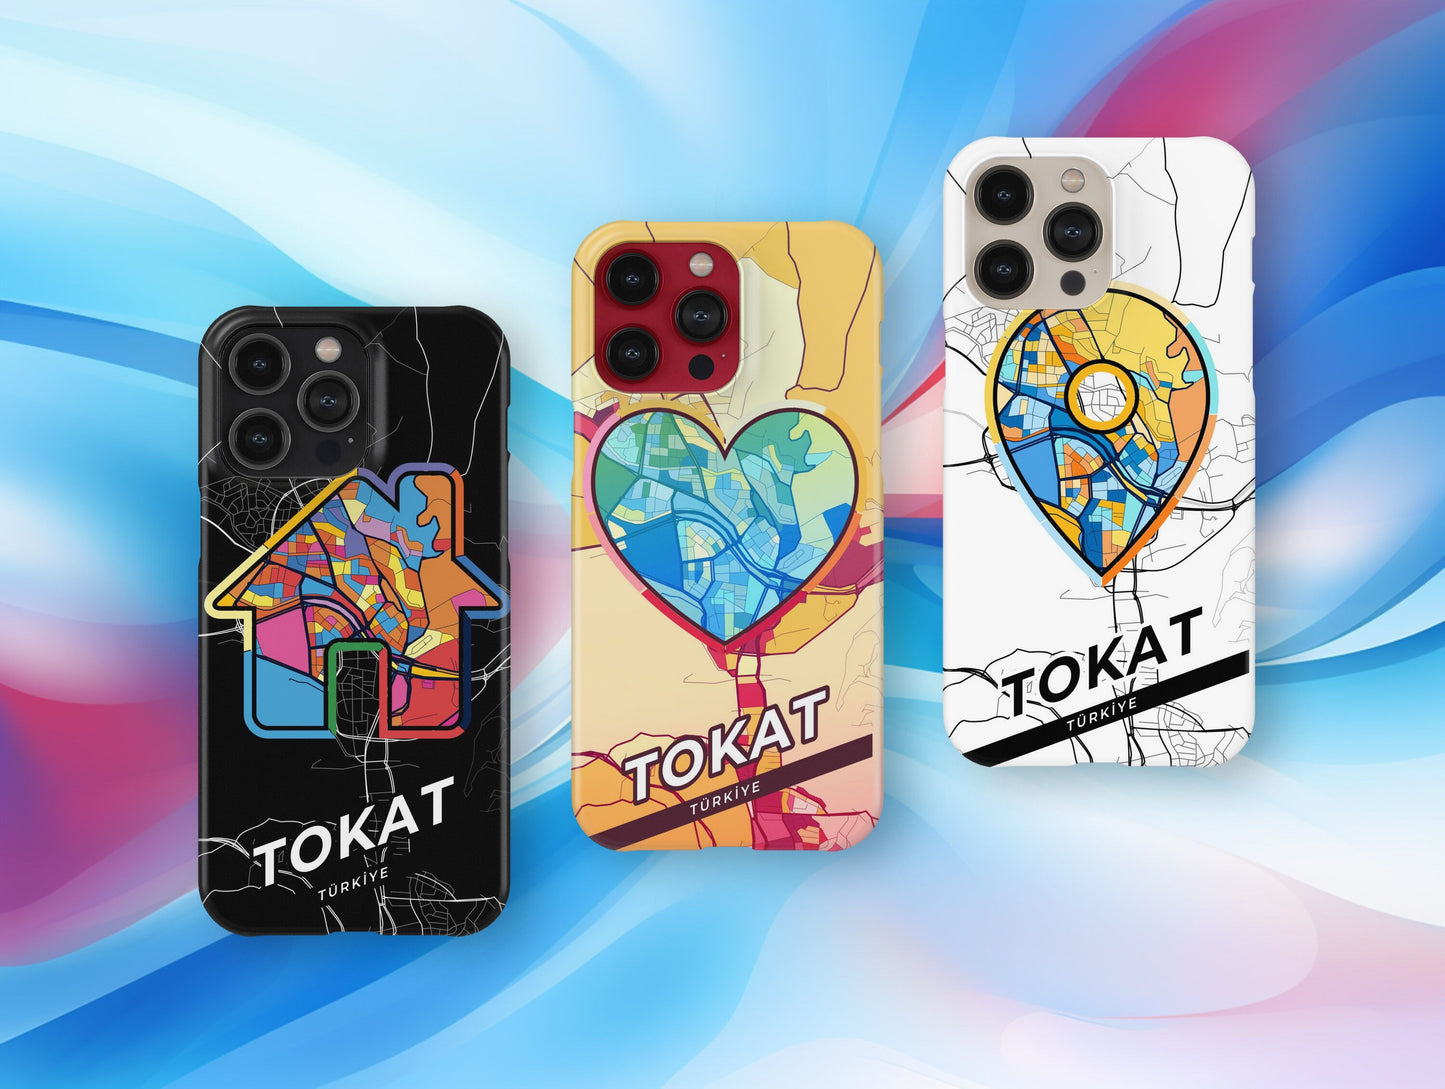 Tokat Turkey slim phone case with colorful icon